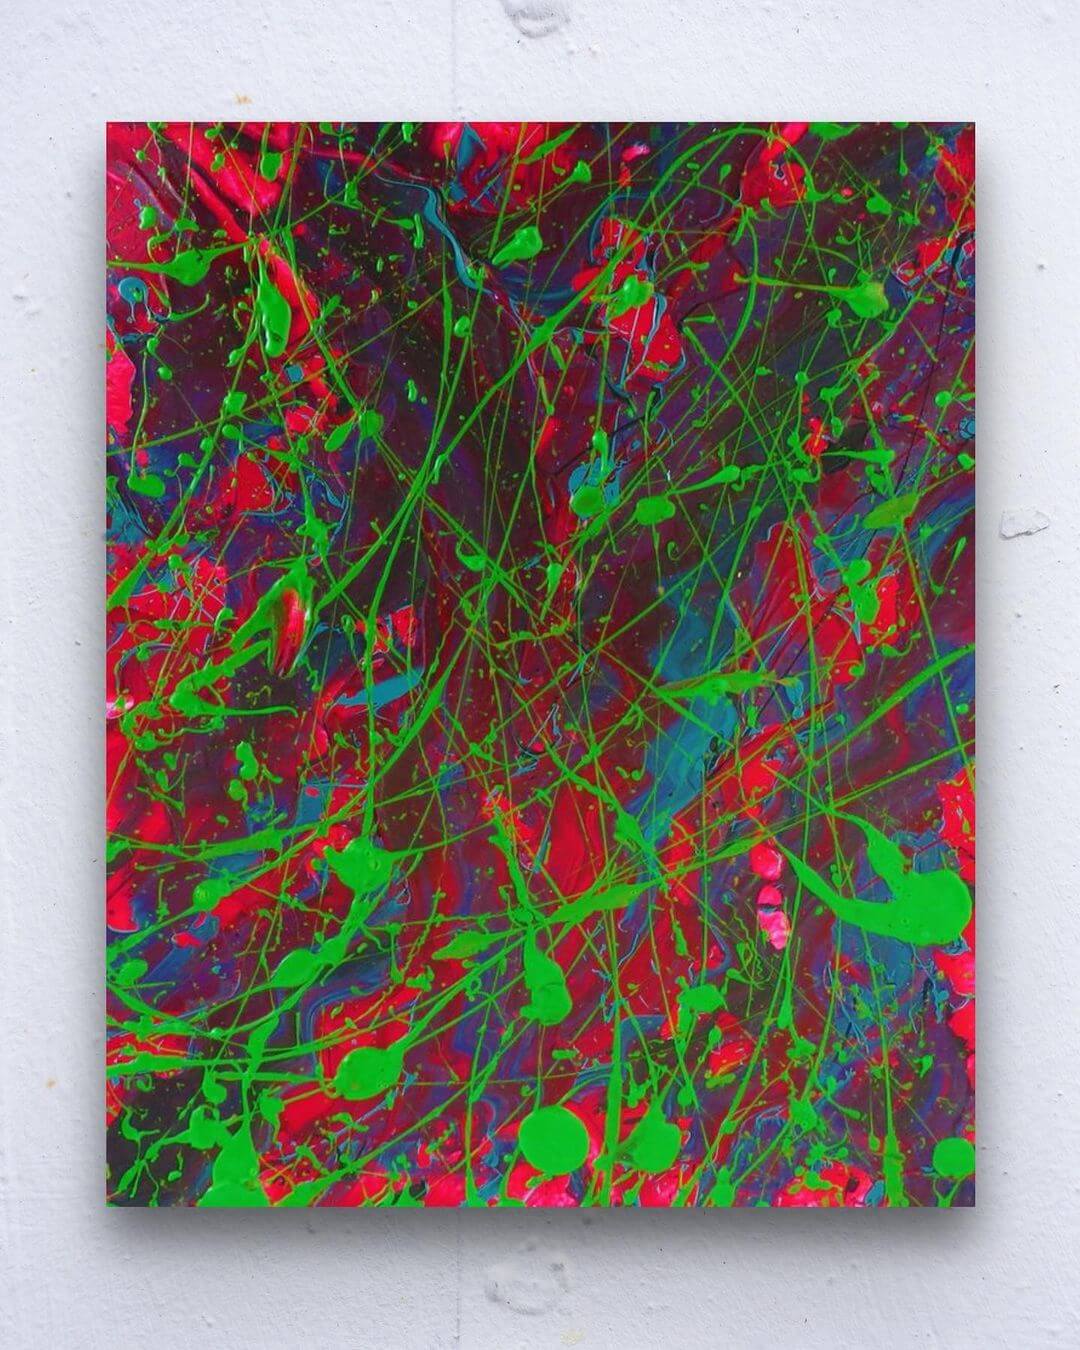 Heavily textured abstract expressionist artwork of red and green.